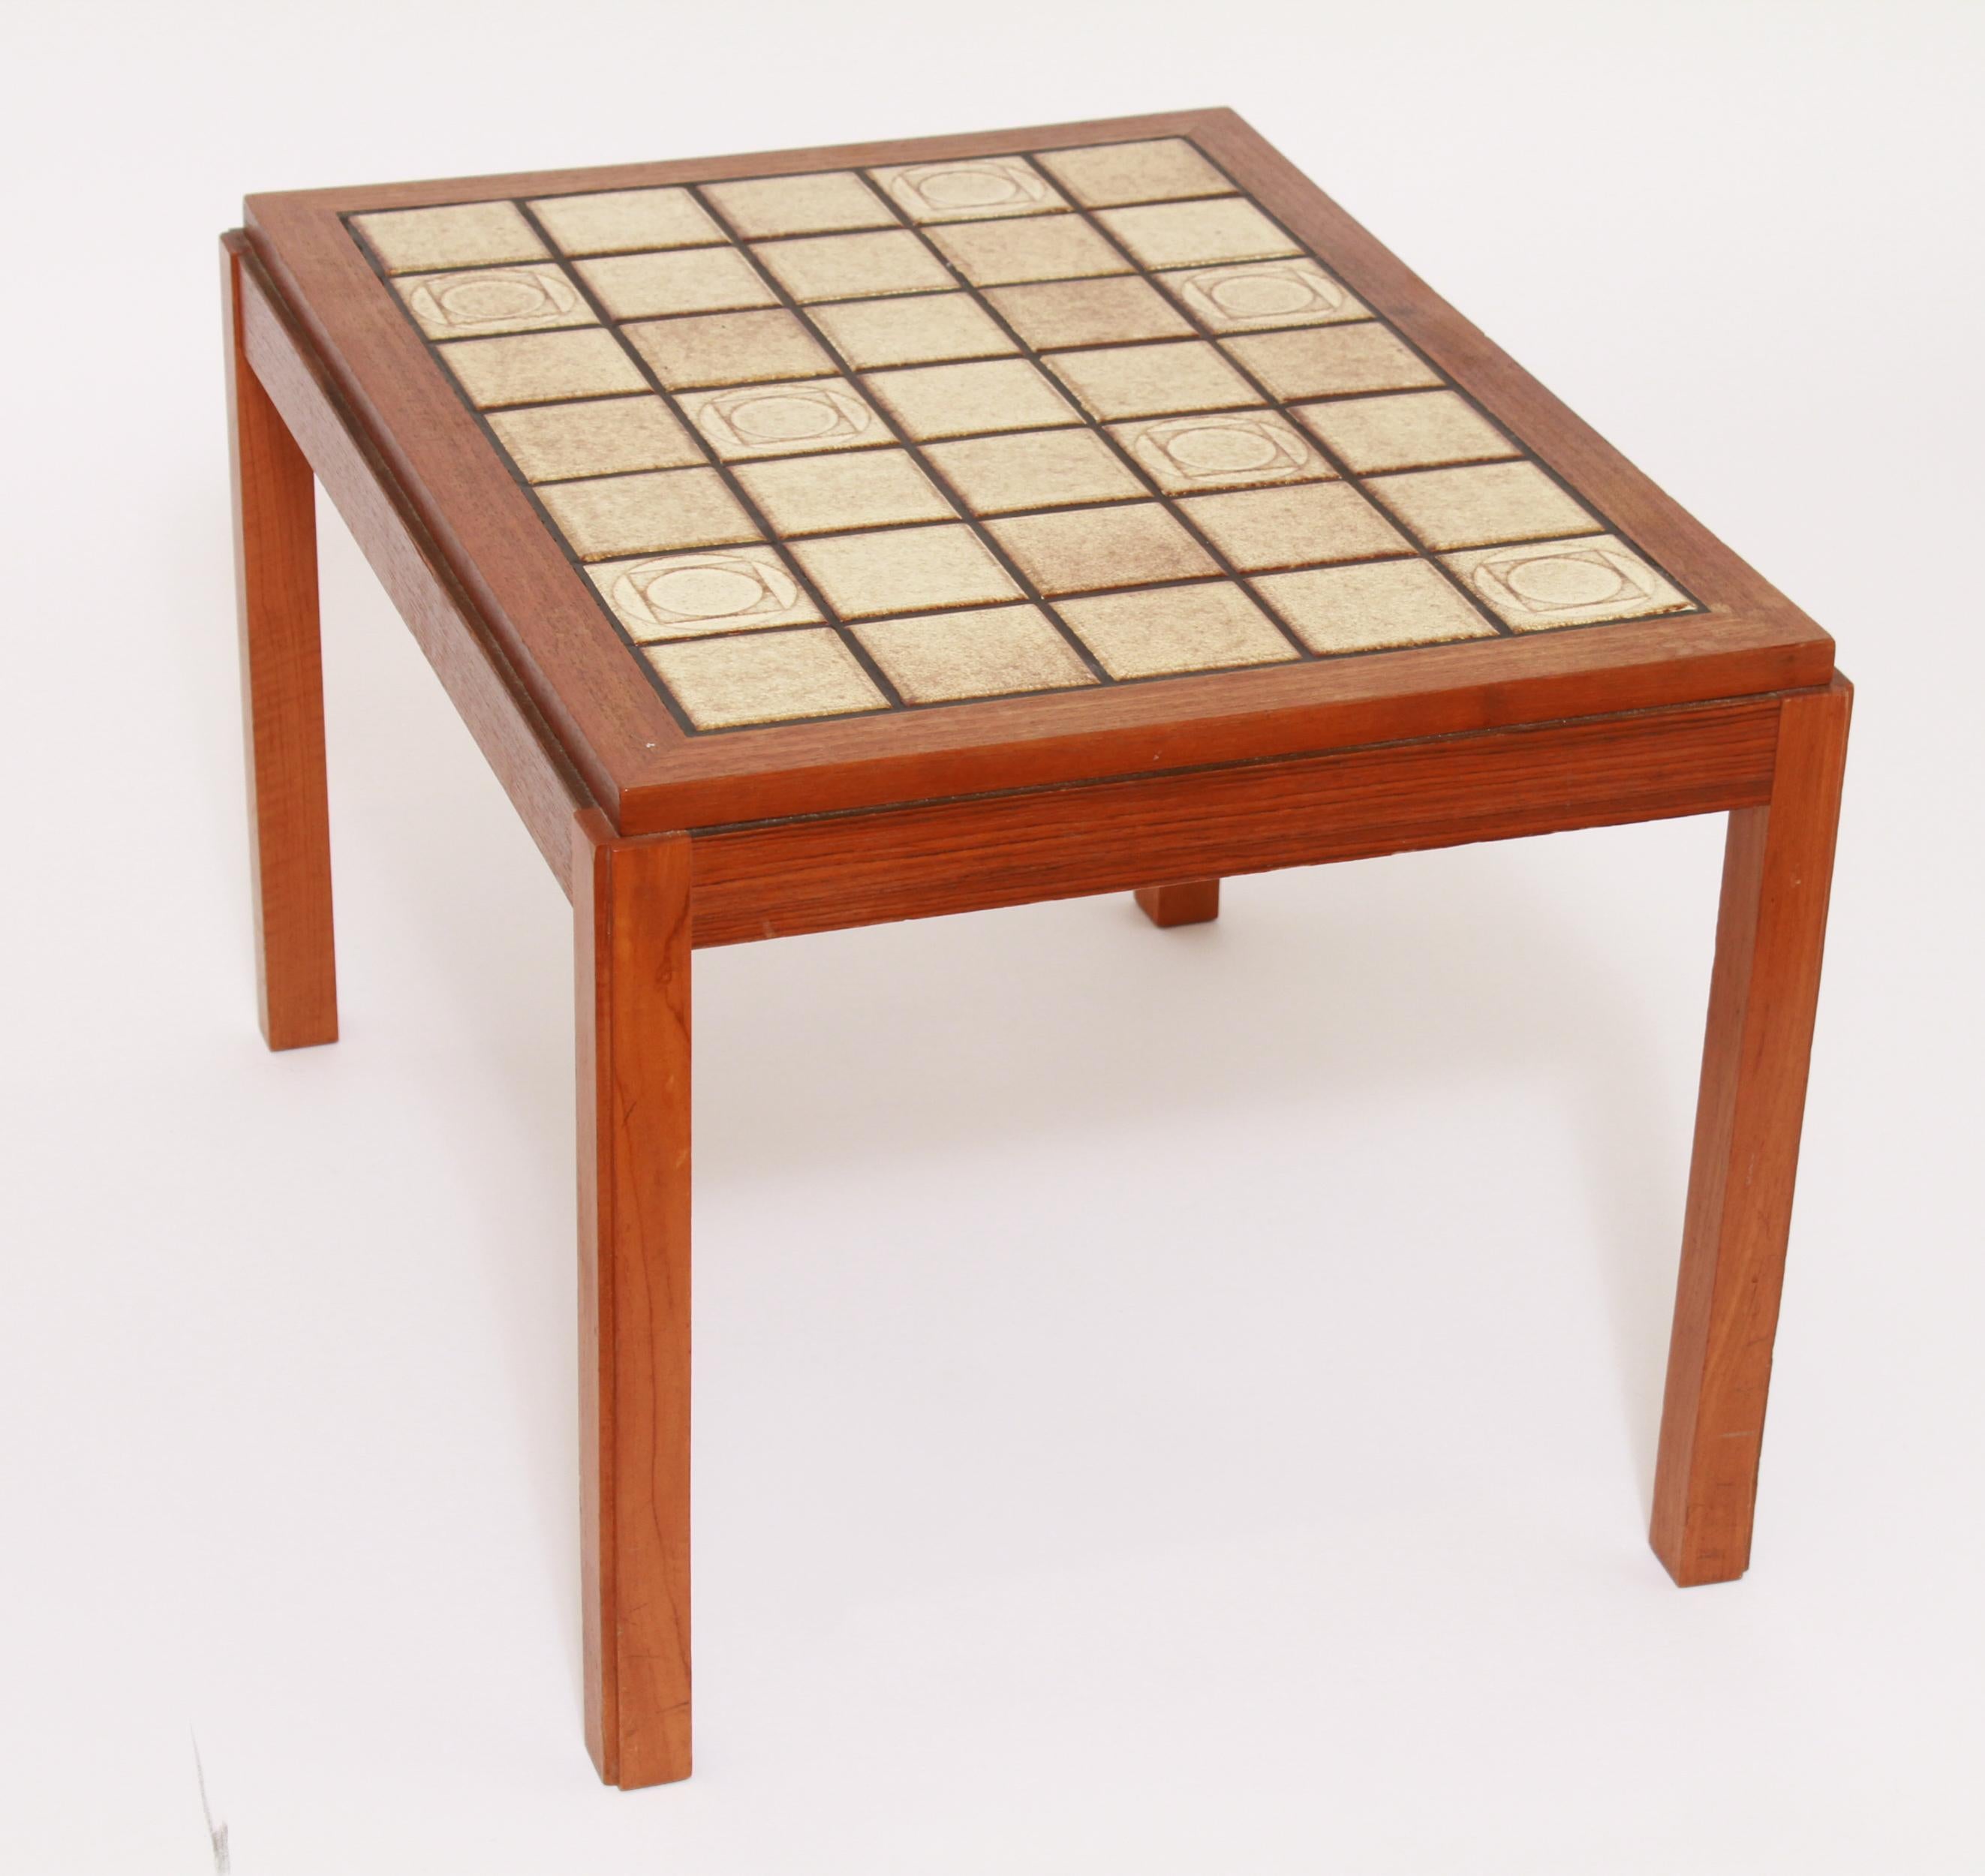 20th Century Mid-Century Modern Side Table with Tiled Top in Roger Capron Style